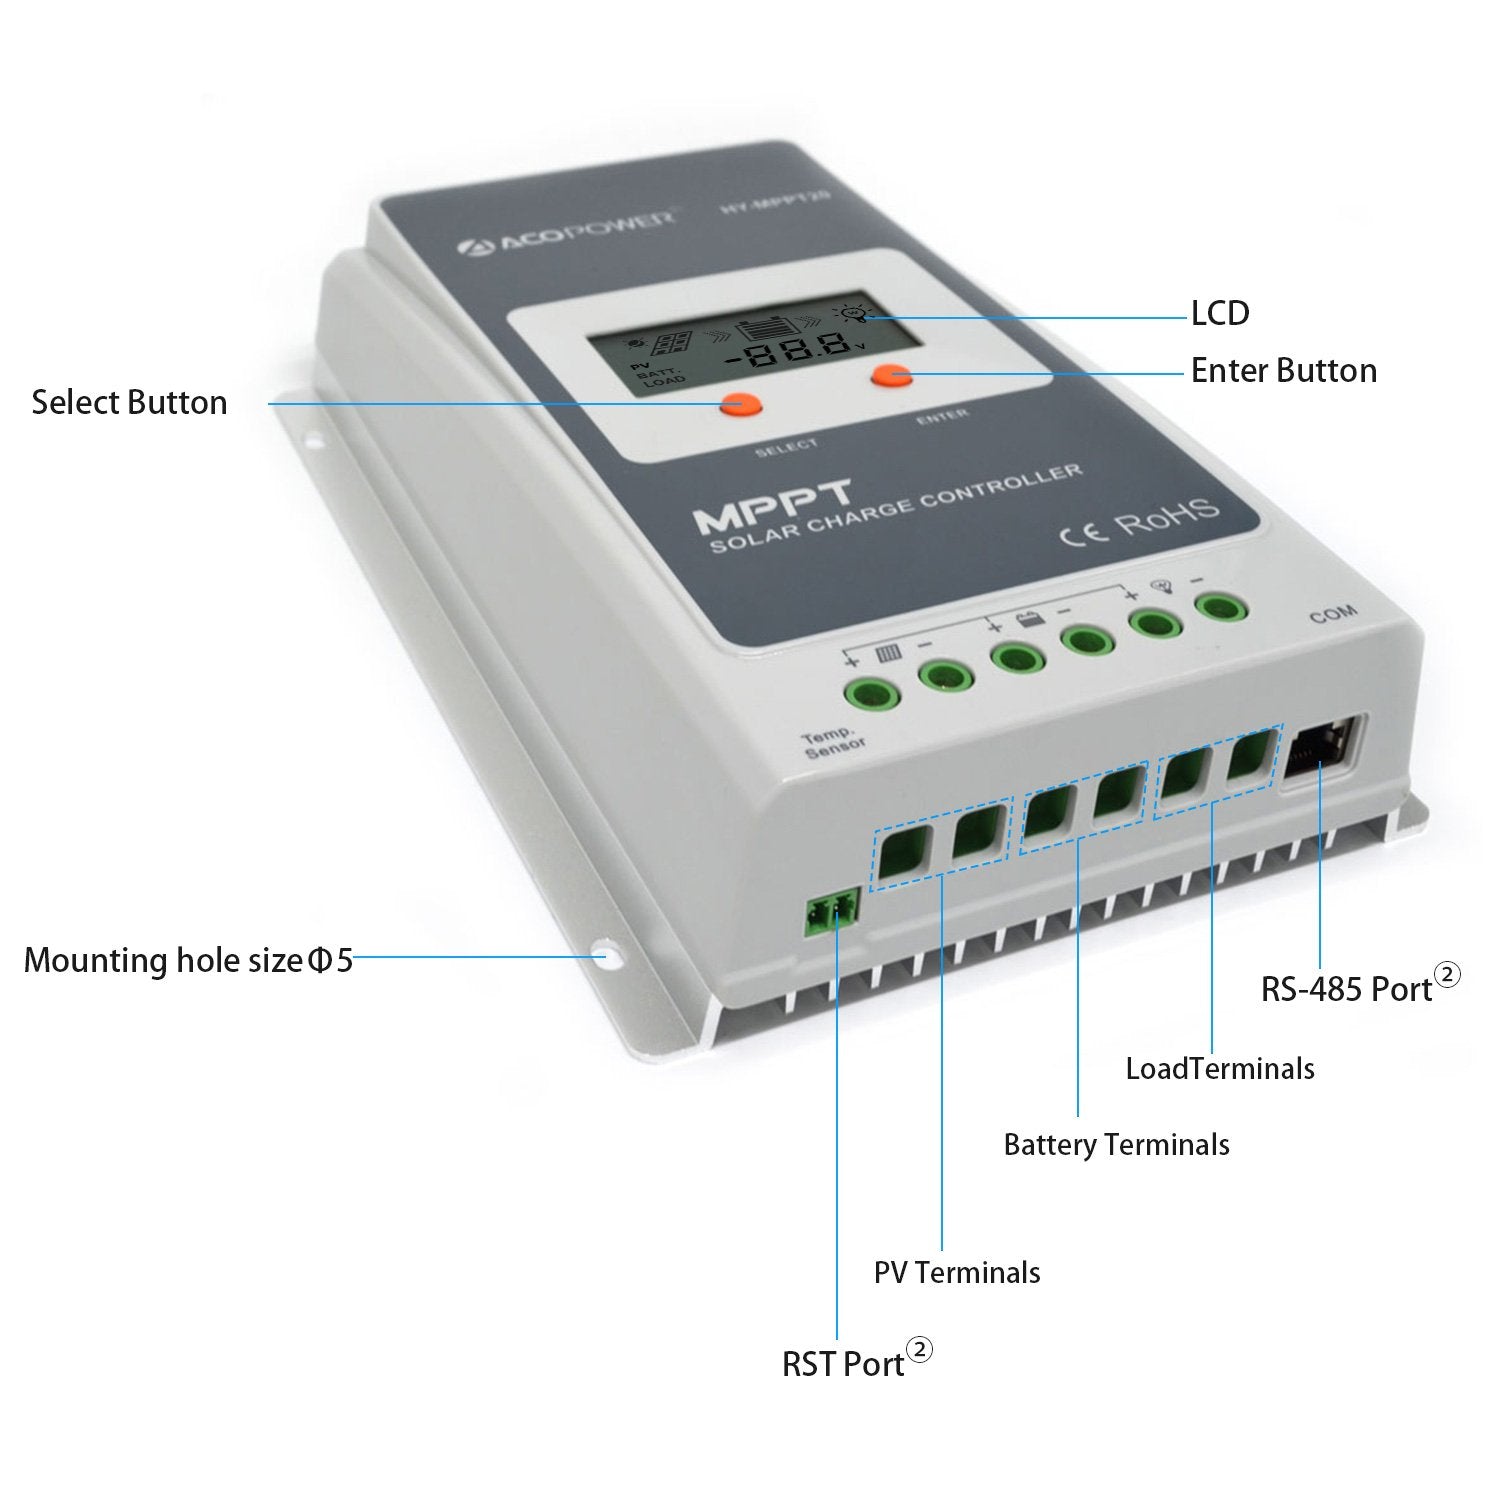 20A MPPT Solar Charge Controller by EPEver